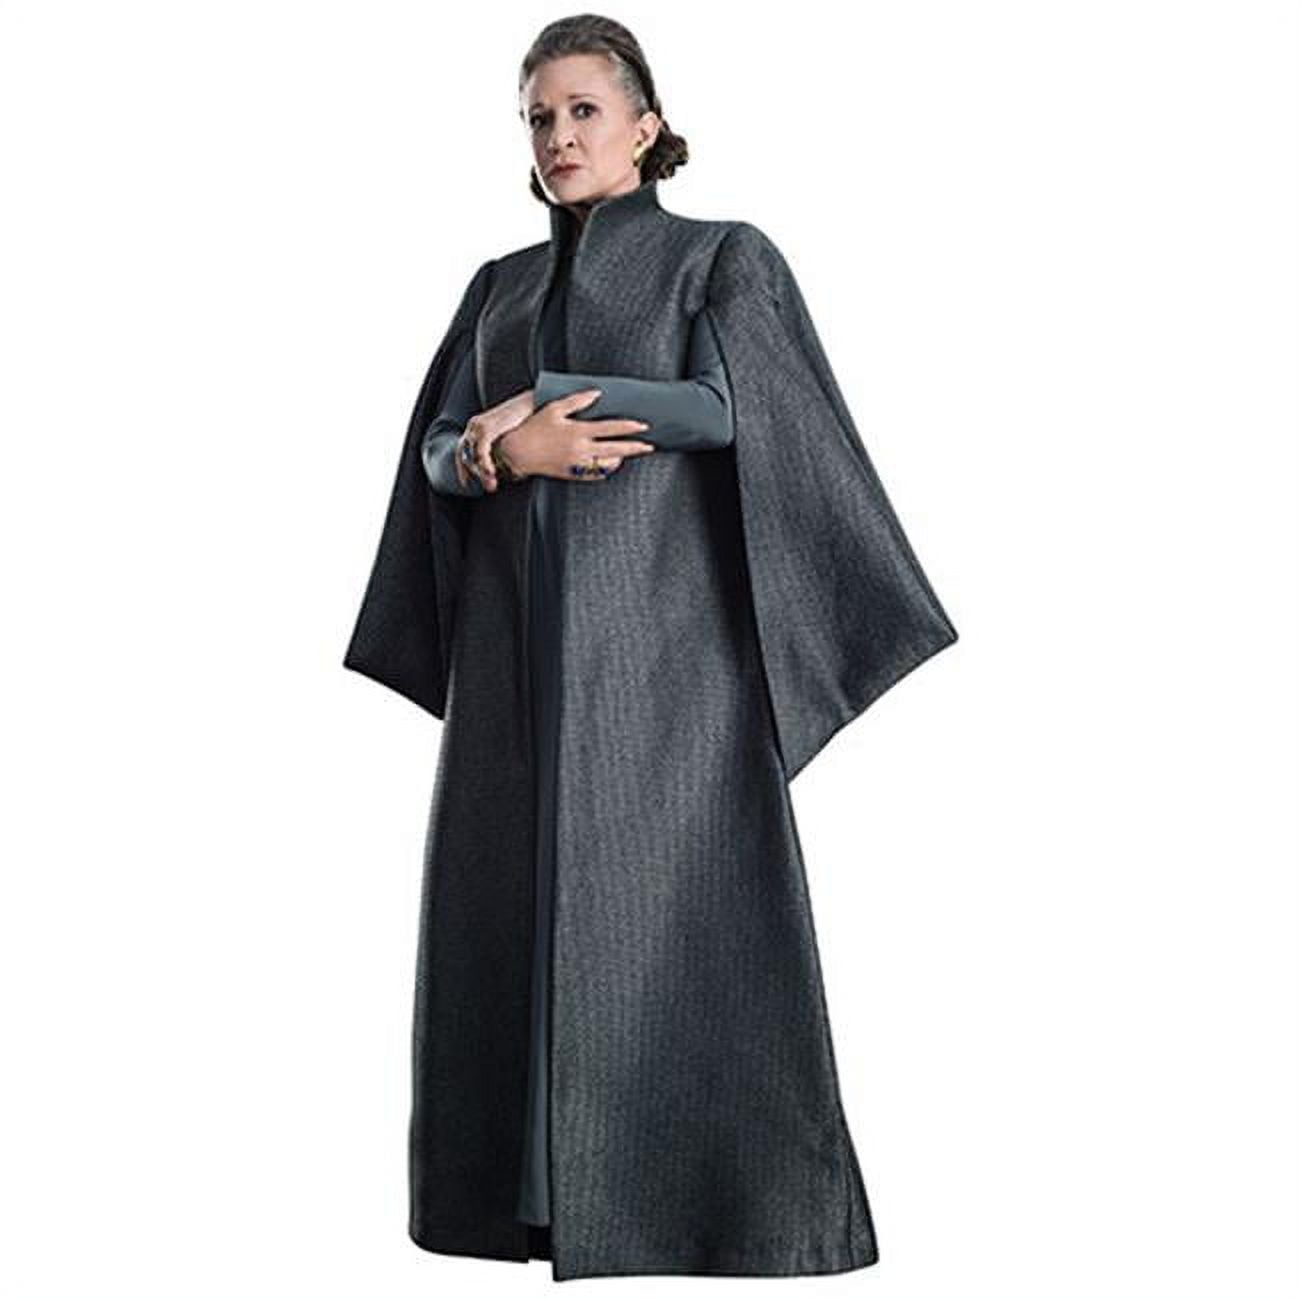 Picture of Advanced Graphics 2528 65 x 31 in. General Leia Organa - Star Wars VIII the Last Jedi